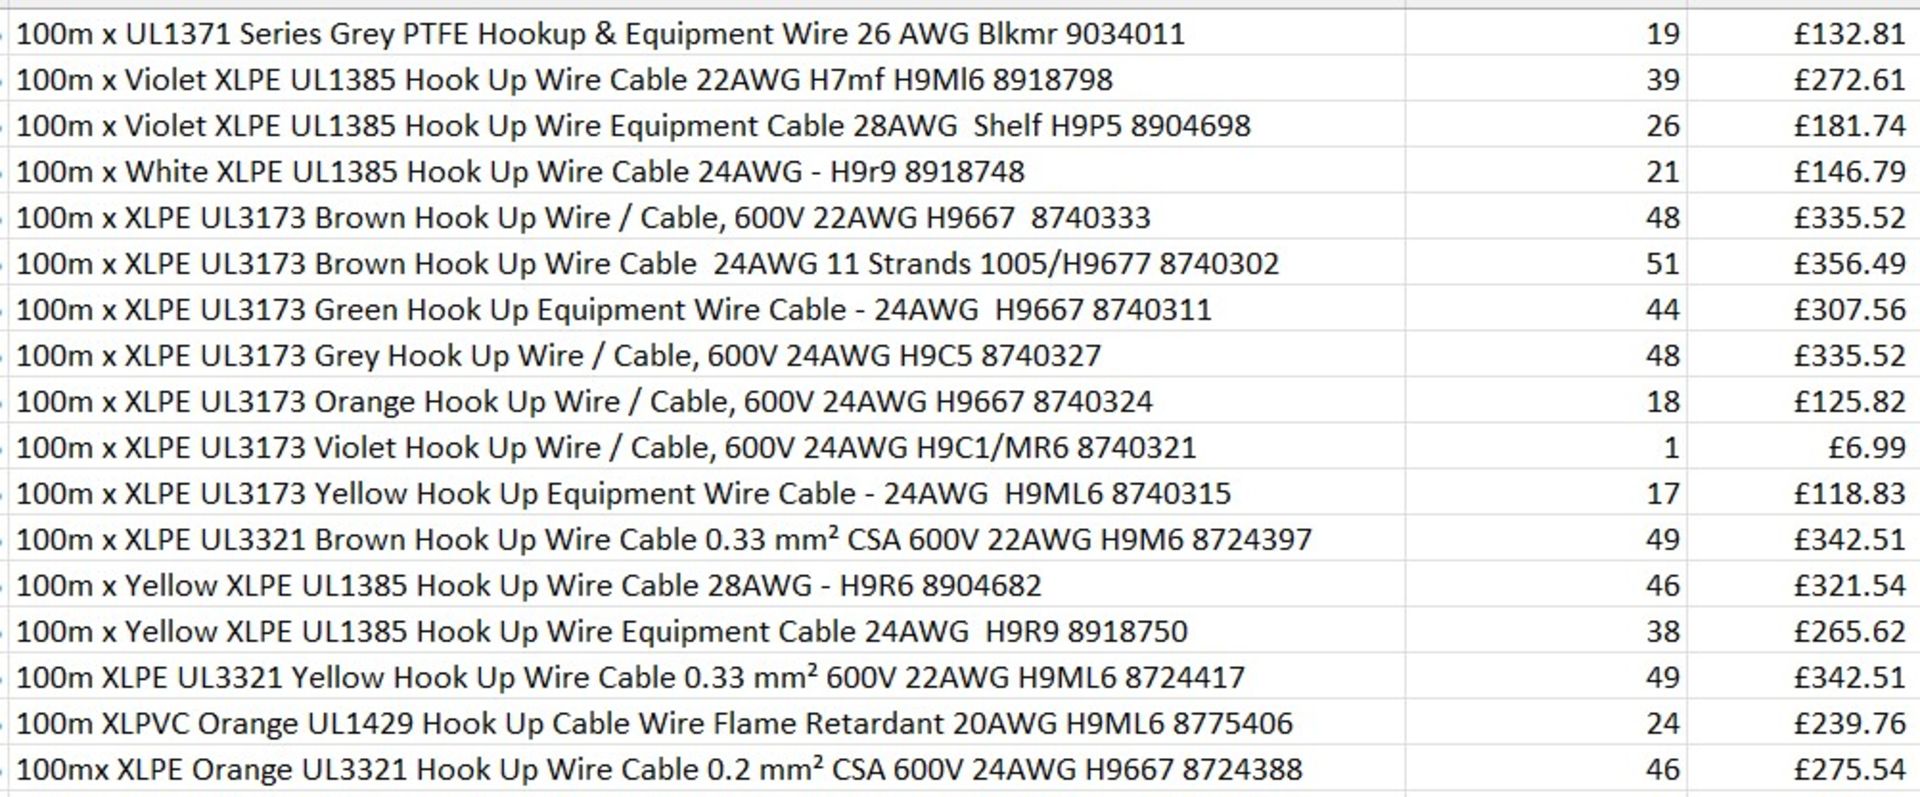 £11k worth of Assorted Hook Up Wire / Cable - over 40 different products - Image 2 of 2